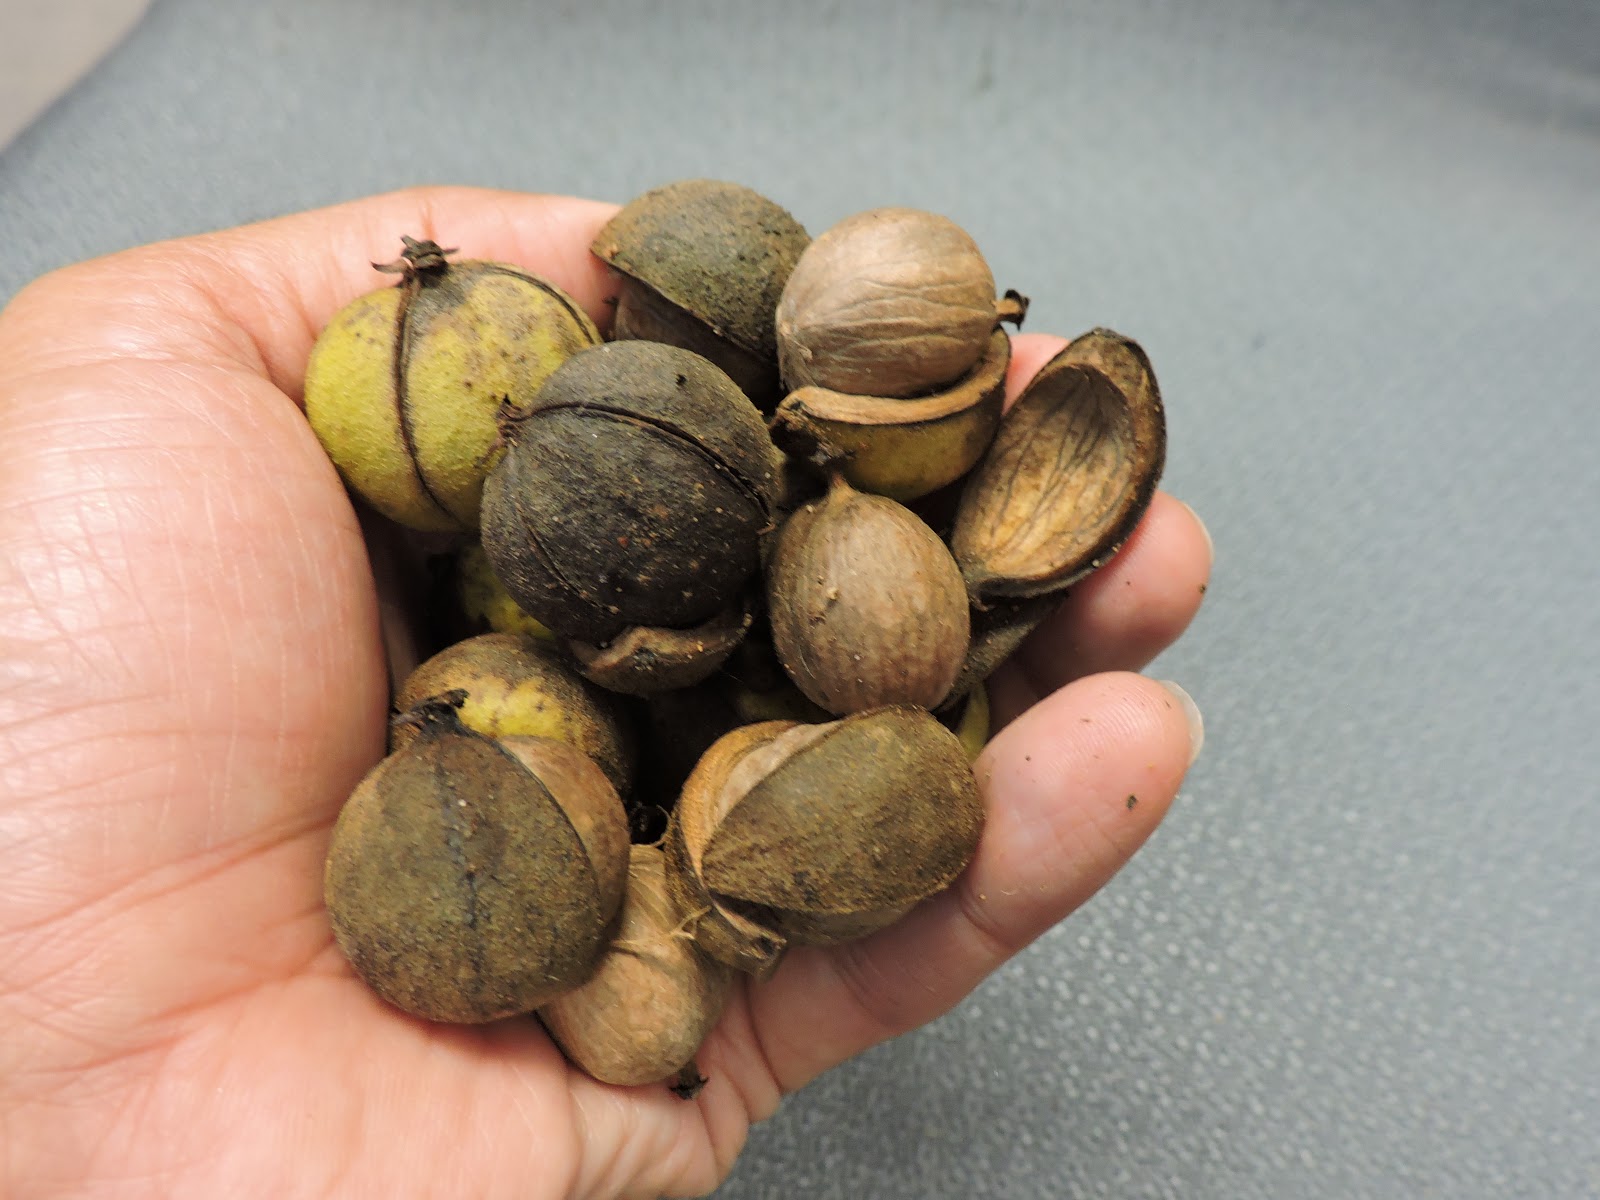 Capital Naturalist by Alonso Abugattas: A Hickory Nut Primer